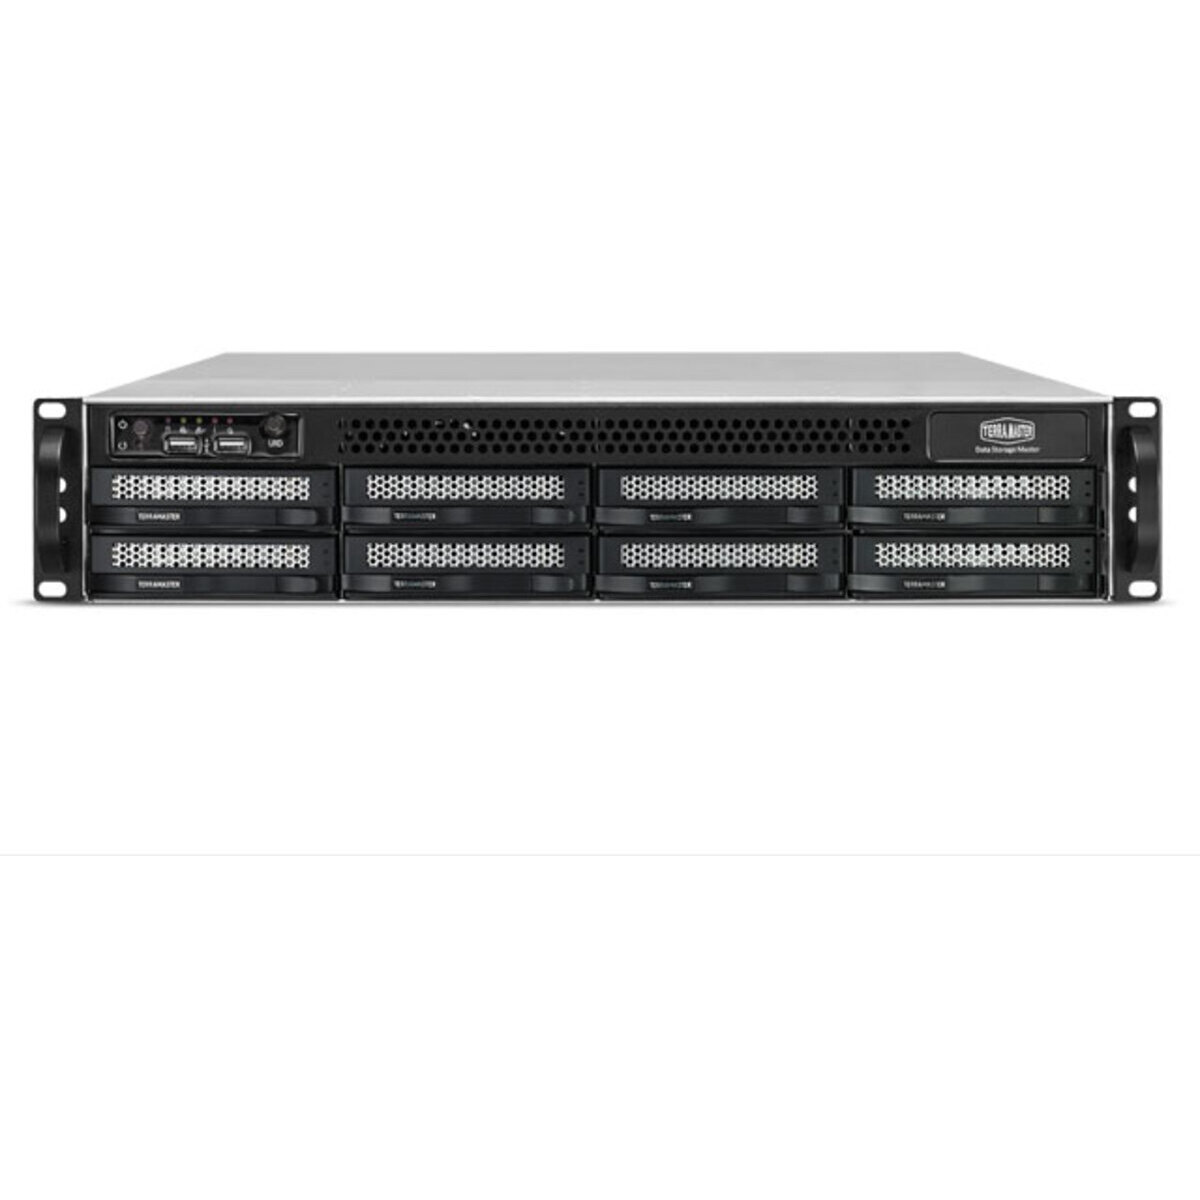 TerraMaster U8-722-2224 2tb 8-Bay RackMount Large Business / Enterprise NAS - Network Attached Storage Device 4x500gb Sandisk Ultra 3D SDSSDH3-500G 2.5 560/520MB/s SATA 6Gb/s SSD CONSUMER Class Drives Installed - Burn-In Tested U8-722-2224